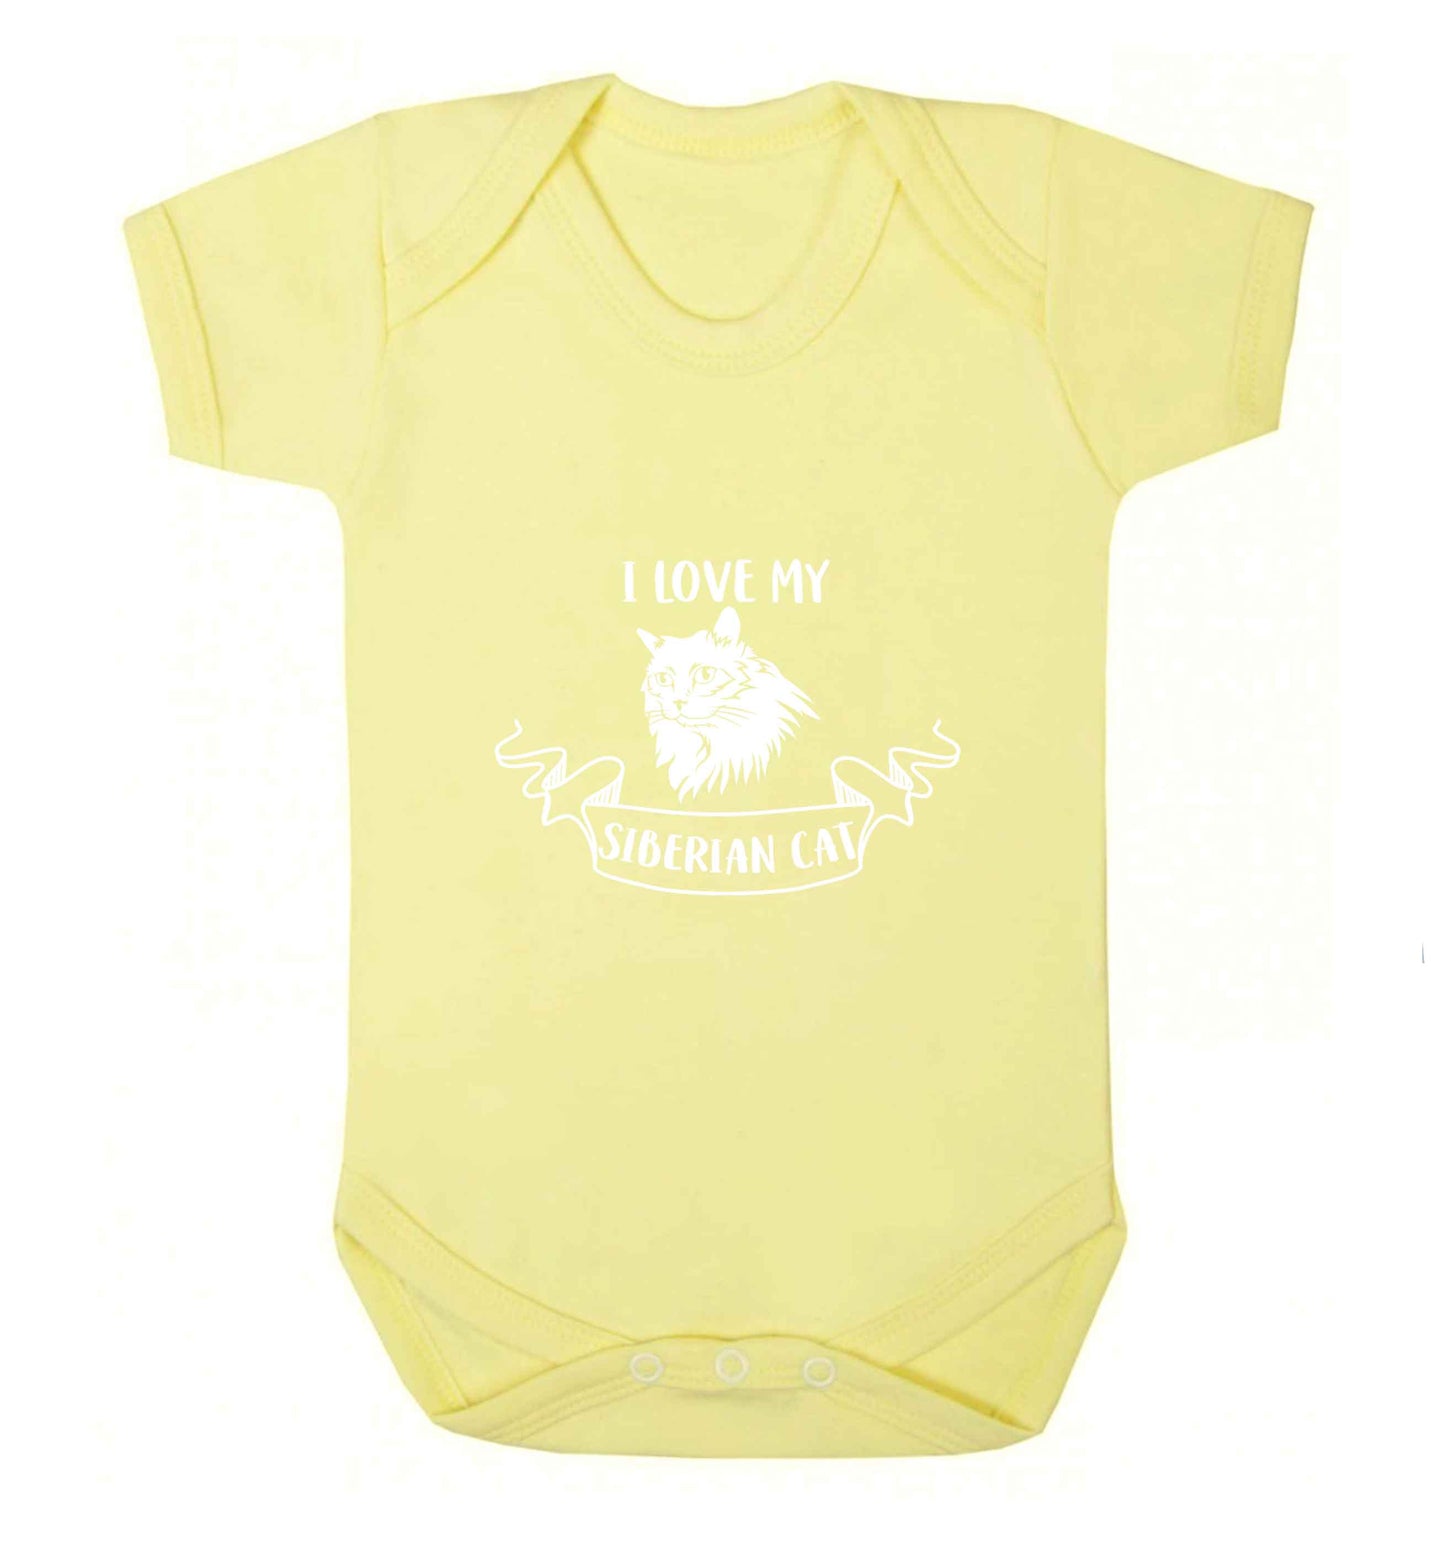 I love my siberian cat baby vest pale yellow 18-24 months